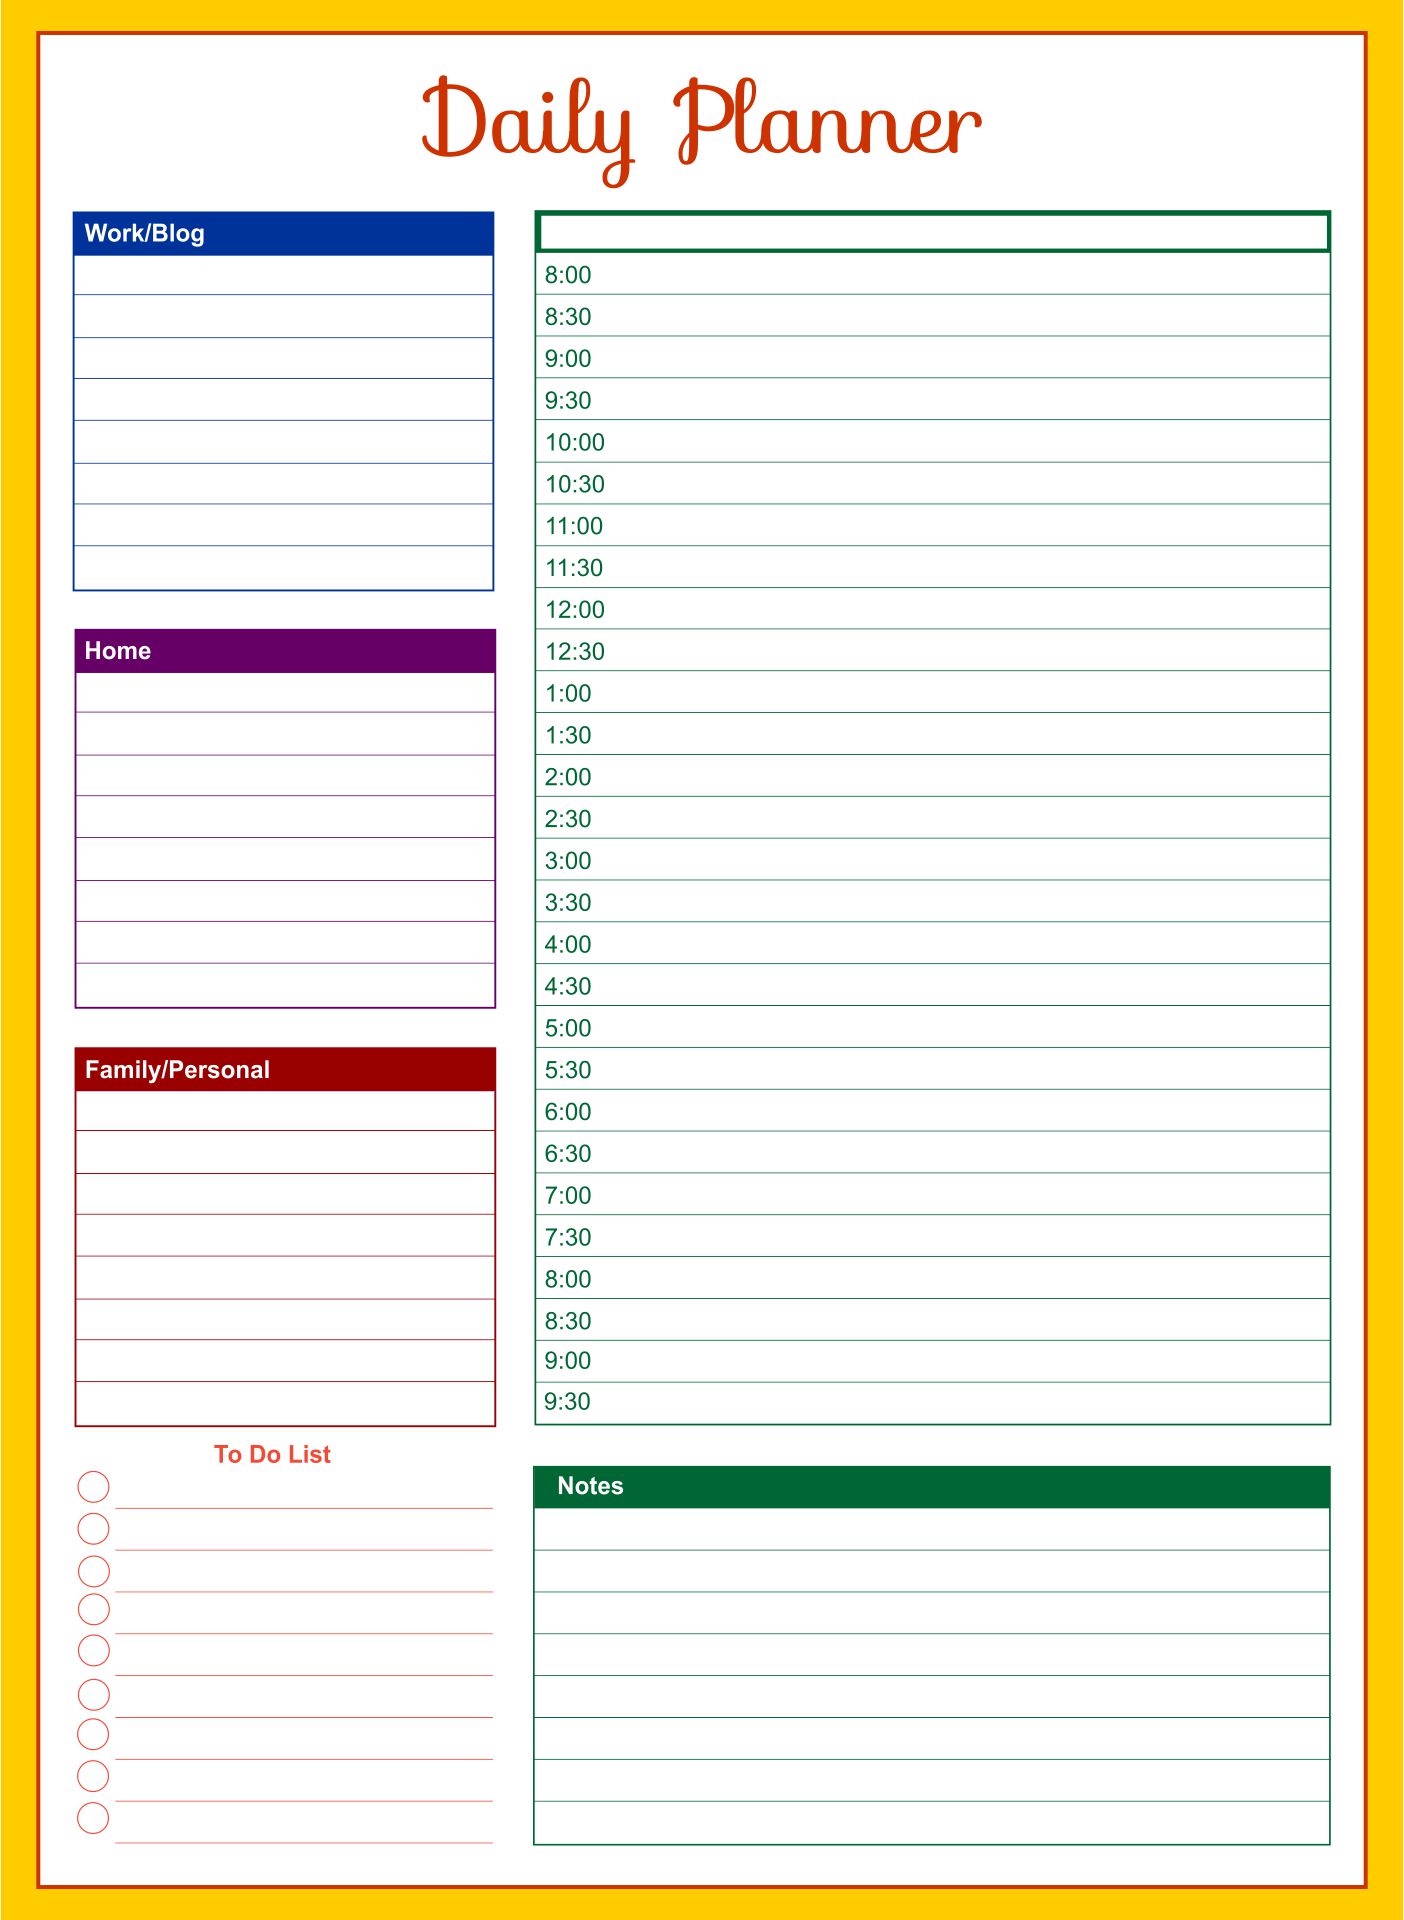 47 Printable Daily Planner Templates Free In Wordexcelpdf 47 